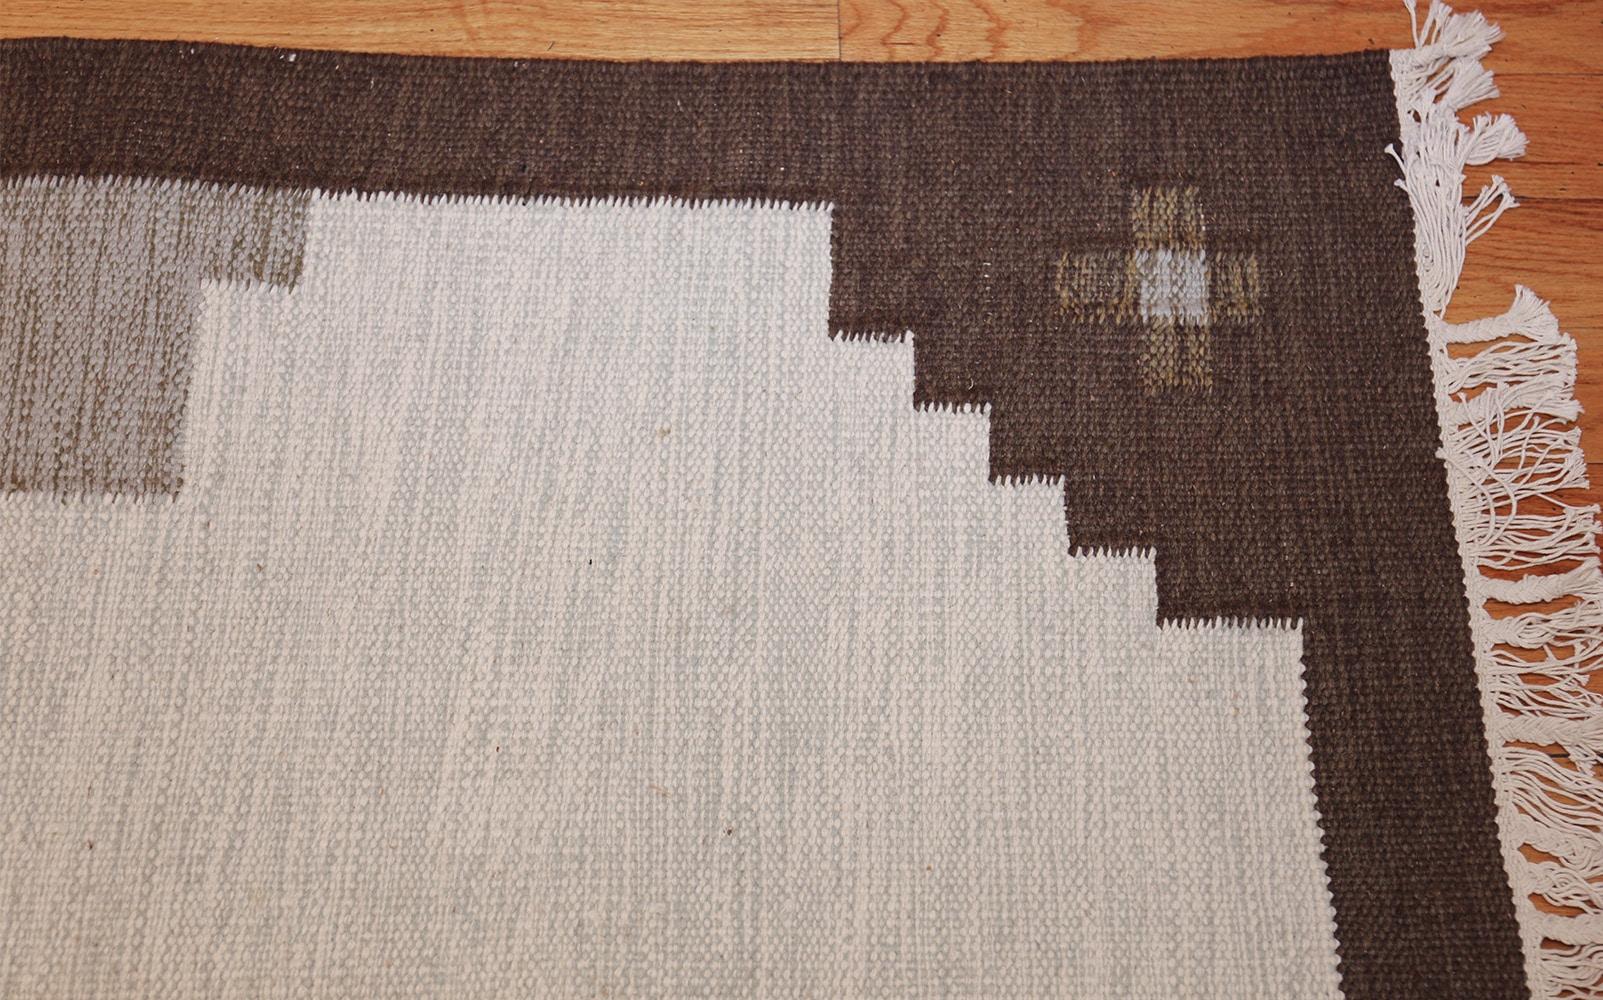 Hand-Woven Vintage Swedish Kilim. Size: 6 ft 7 in x 10 ft (2.01 m x 3.05 m)